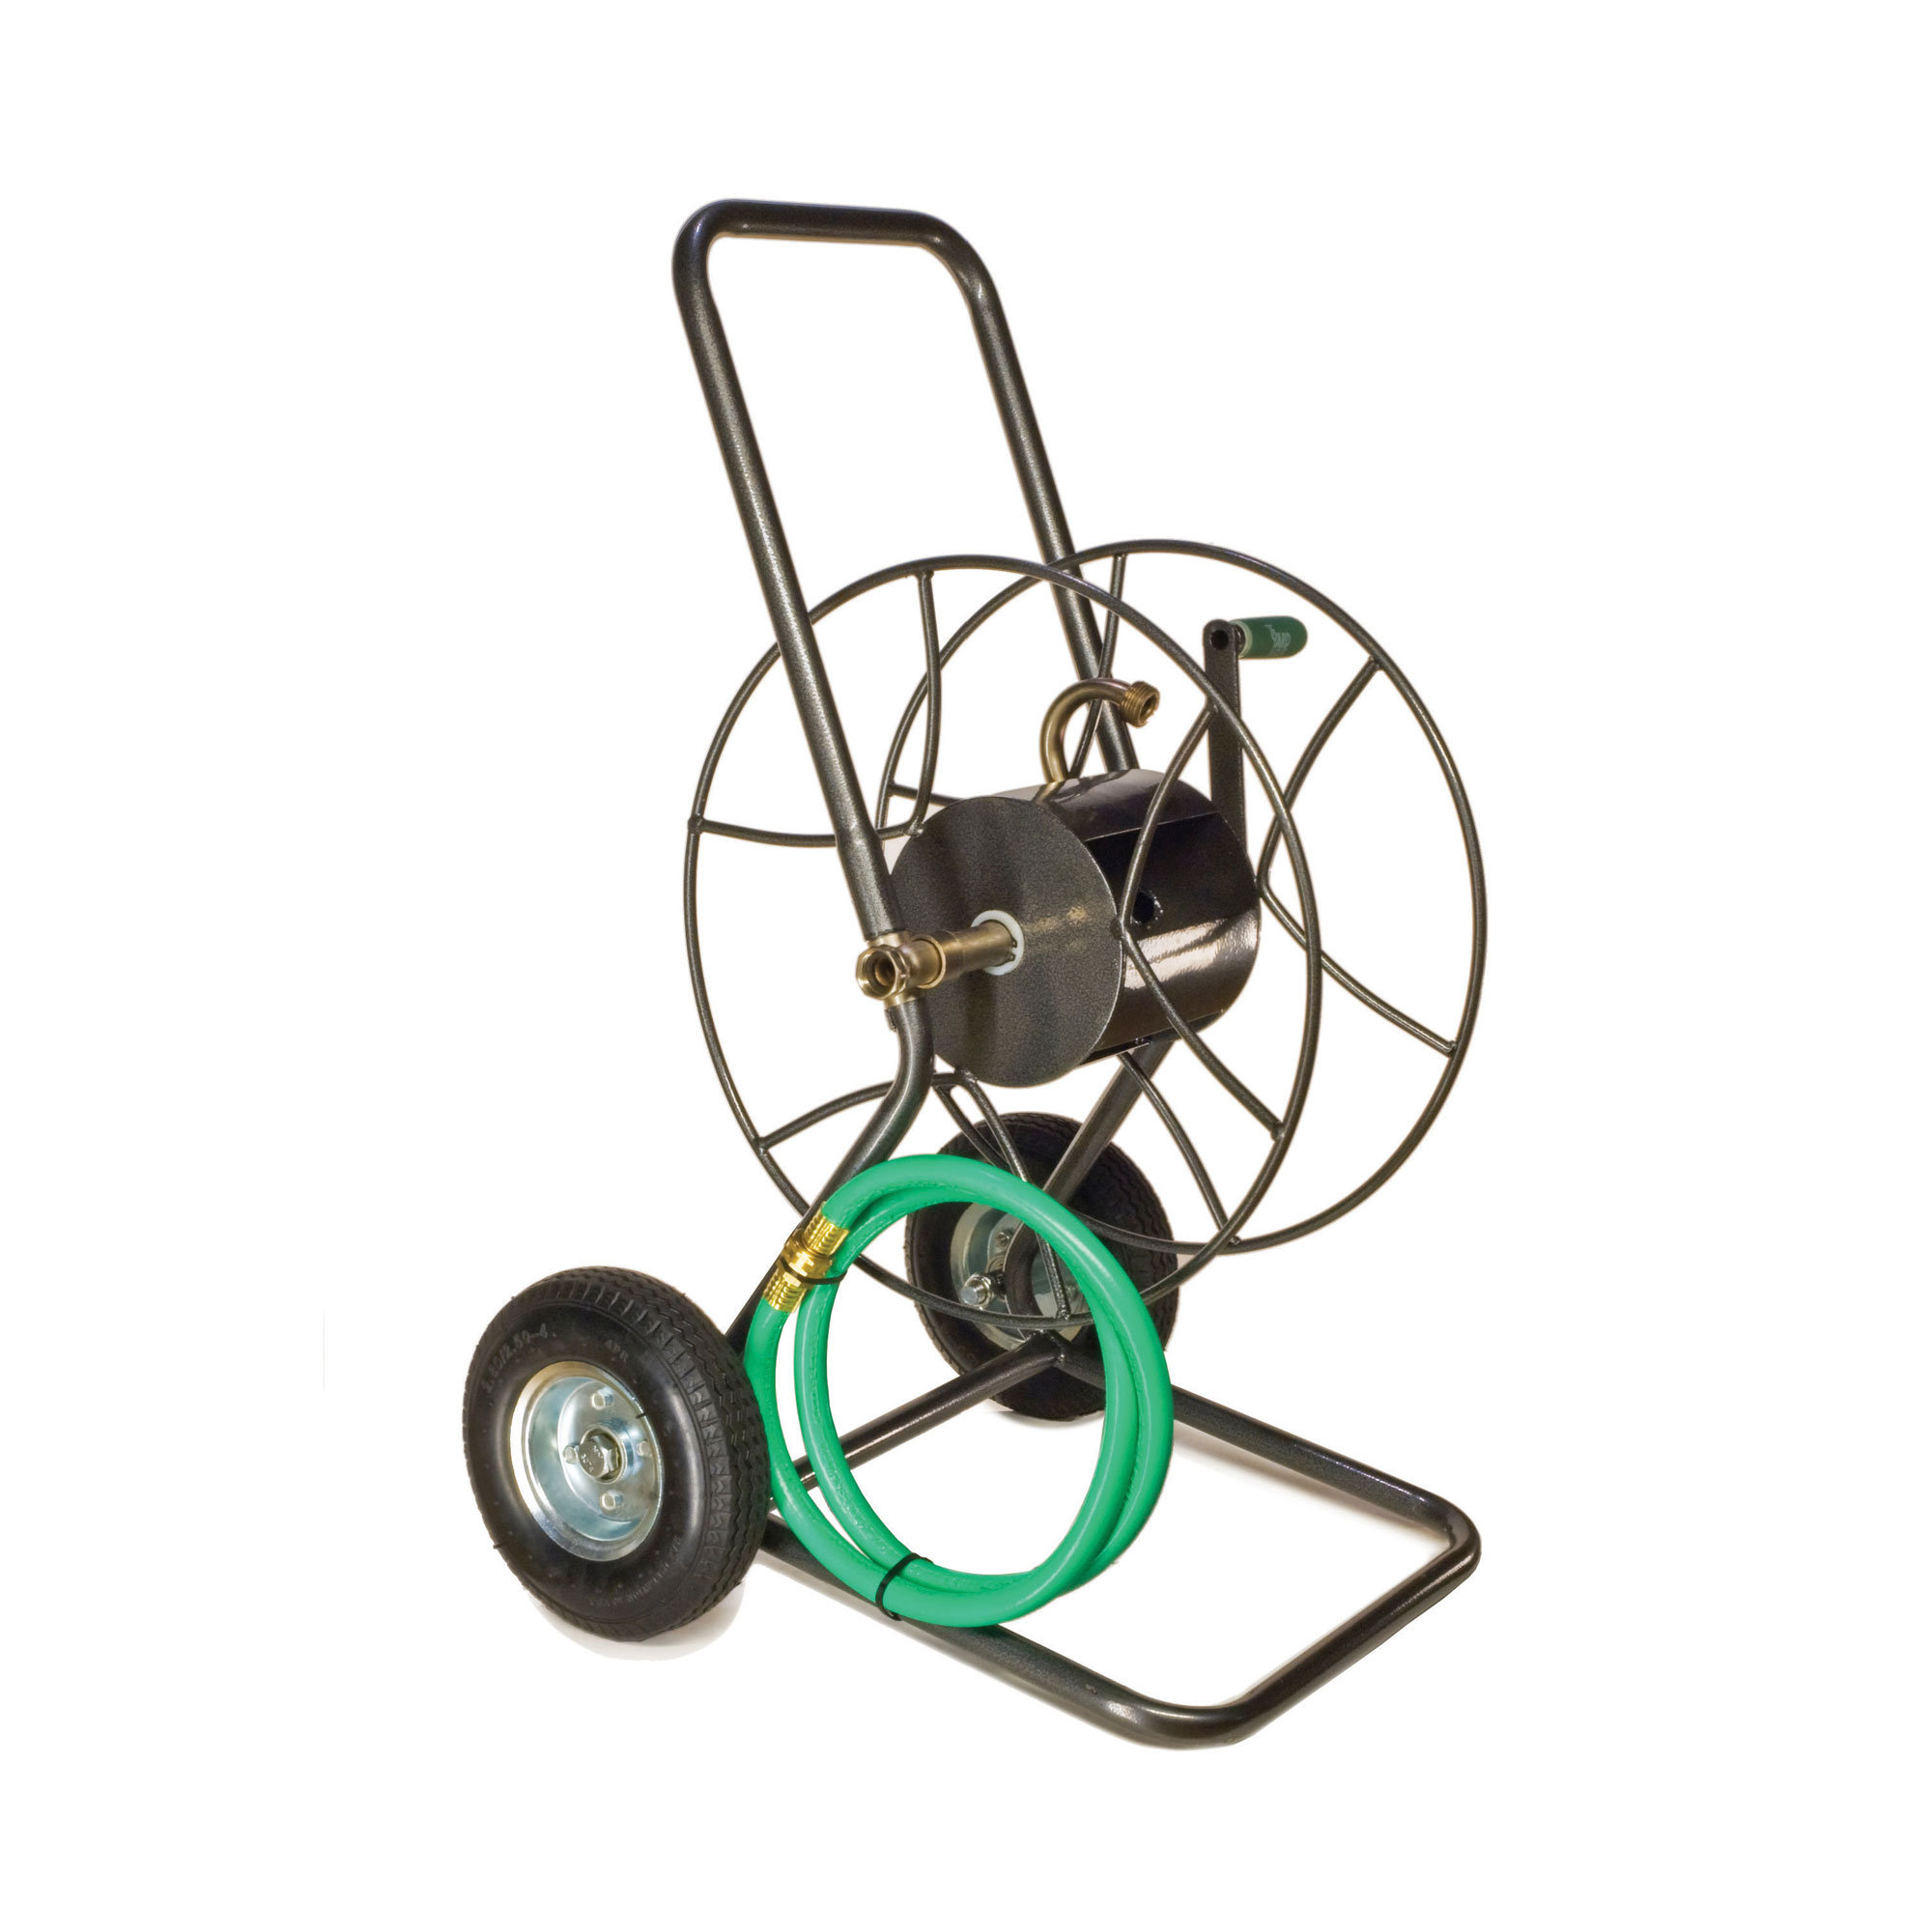 AMES REEL EASY HOSE REEL CART CADDY WITH HOSE